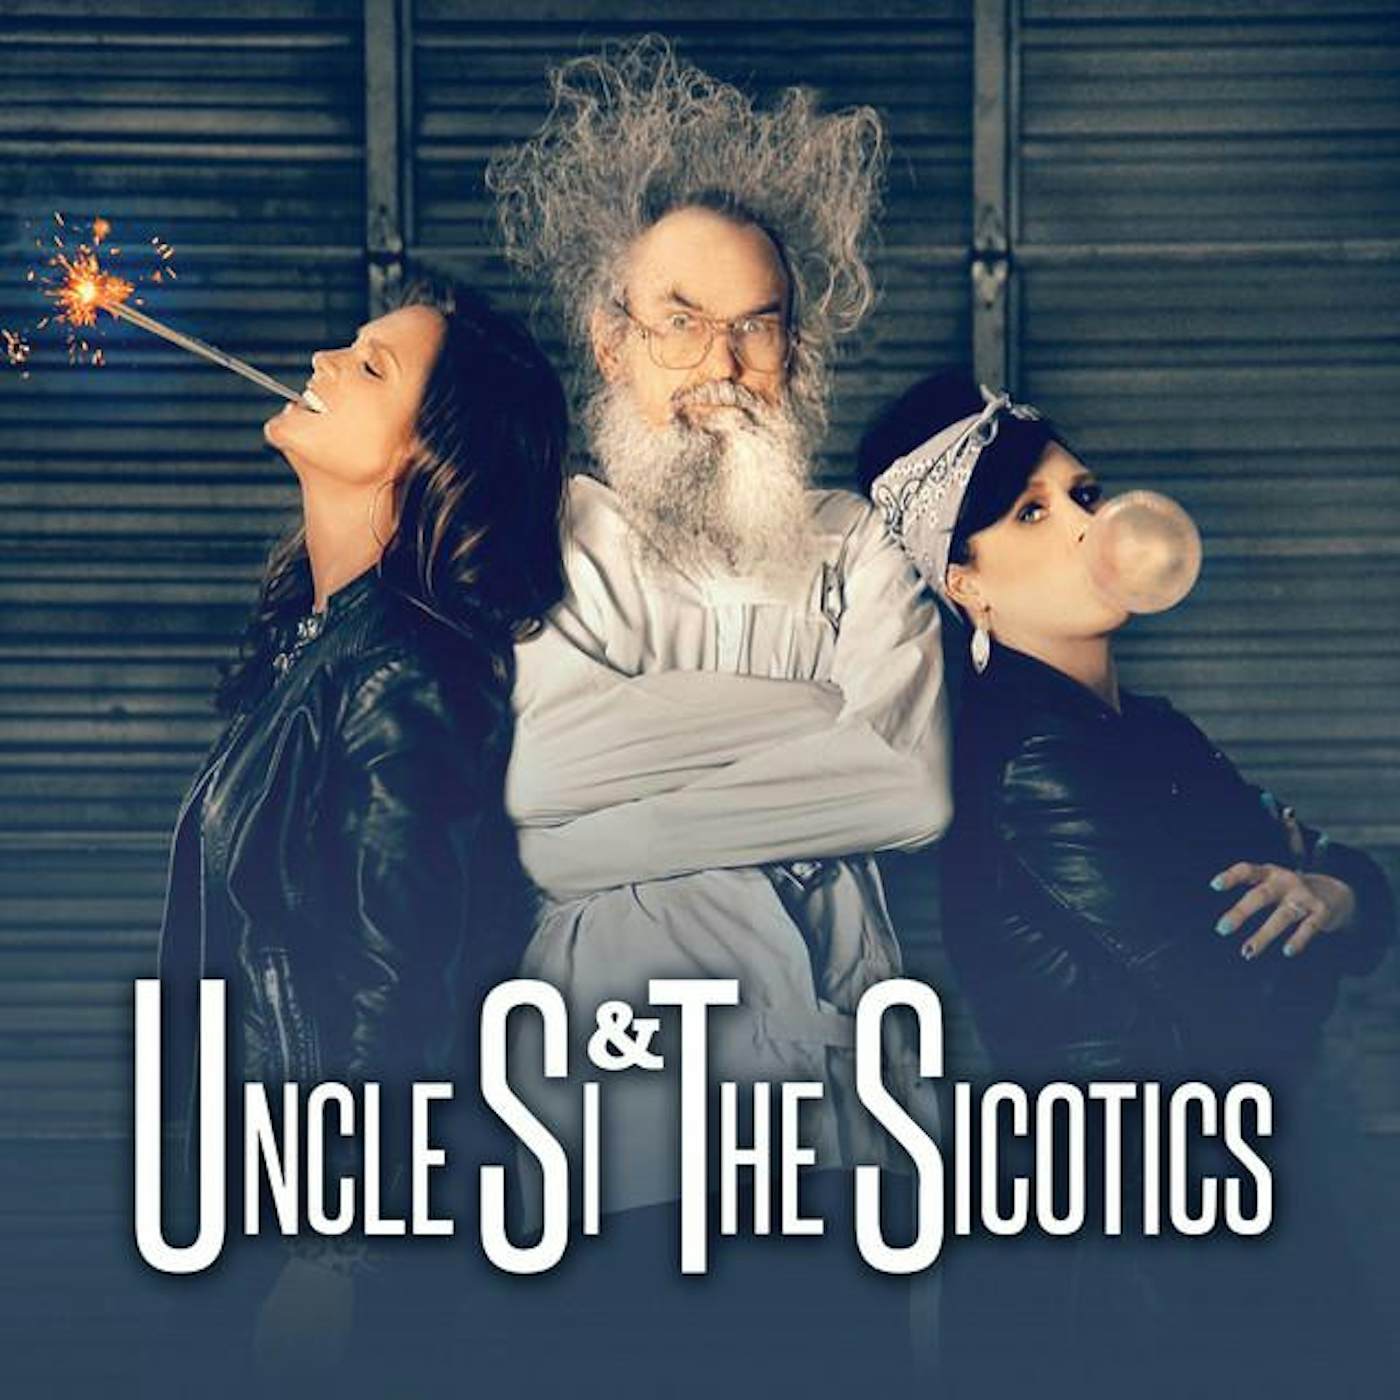 Uncle Si and the Sicotoics